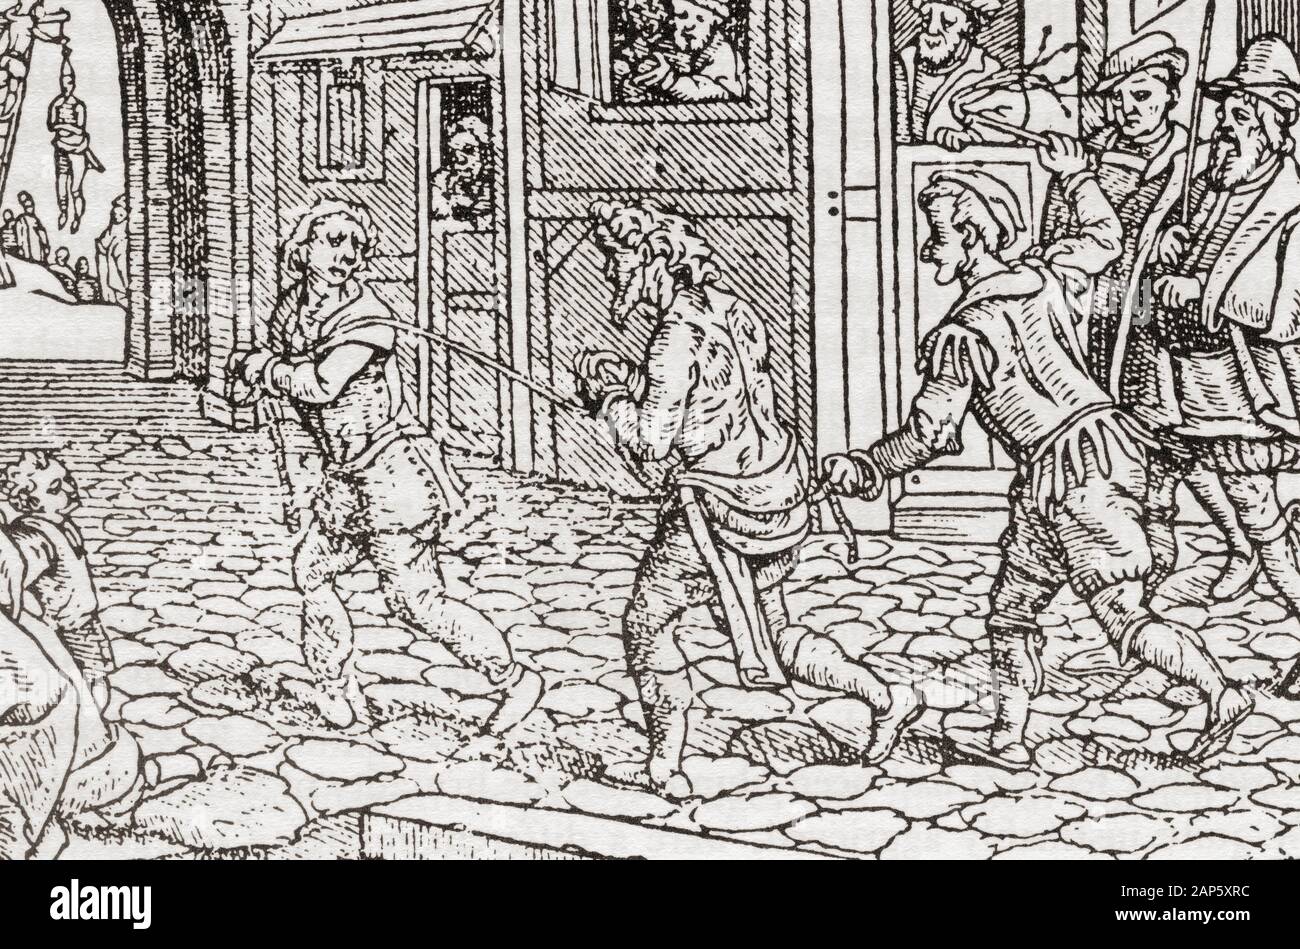 In 16th century England professional card sharks with marked packs and loaded dice took advantage of simple people, this was only one of many criminal activities into which people were forced by unemployment.  Seen here one such criminal having been caught is being taken for punishment which was public and severe. Stock Photo